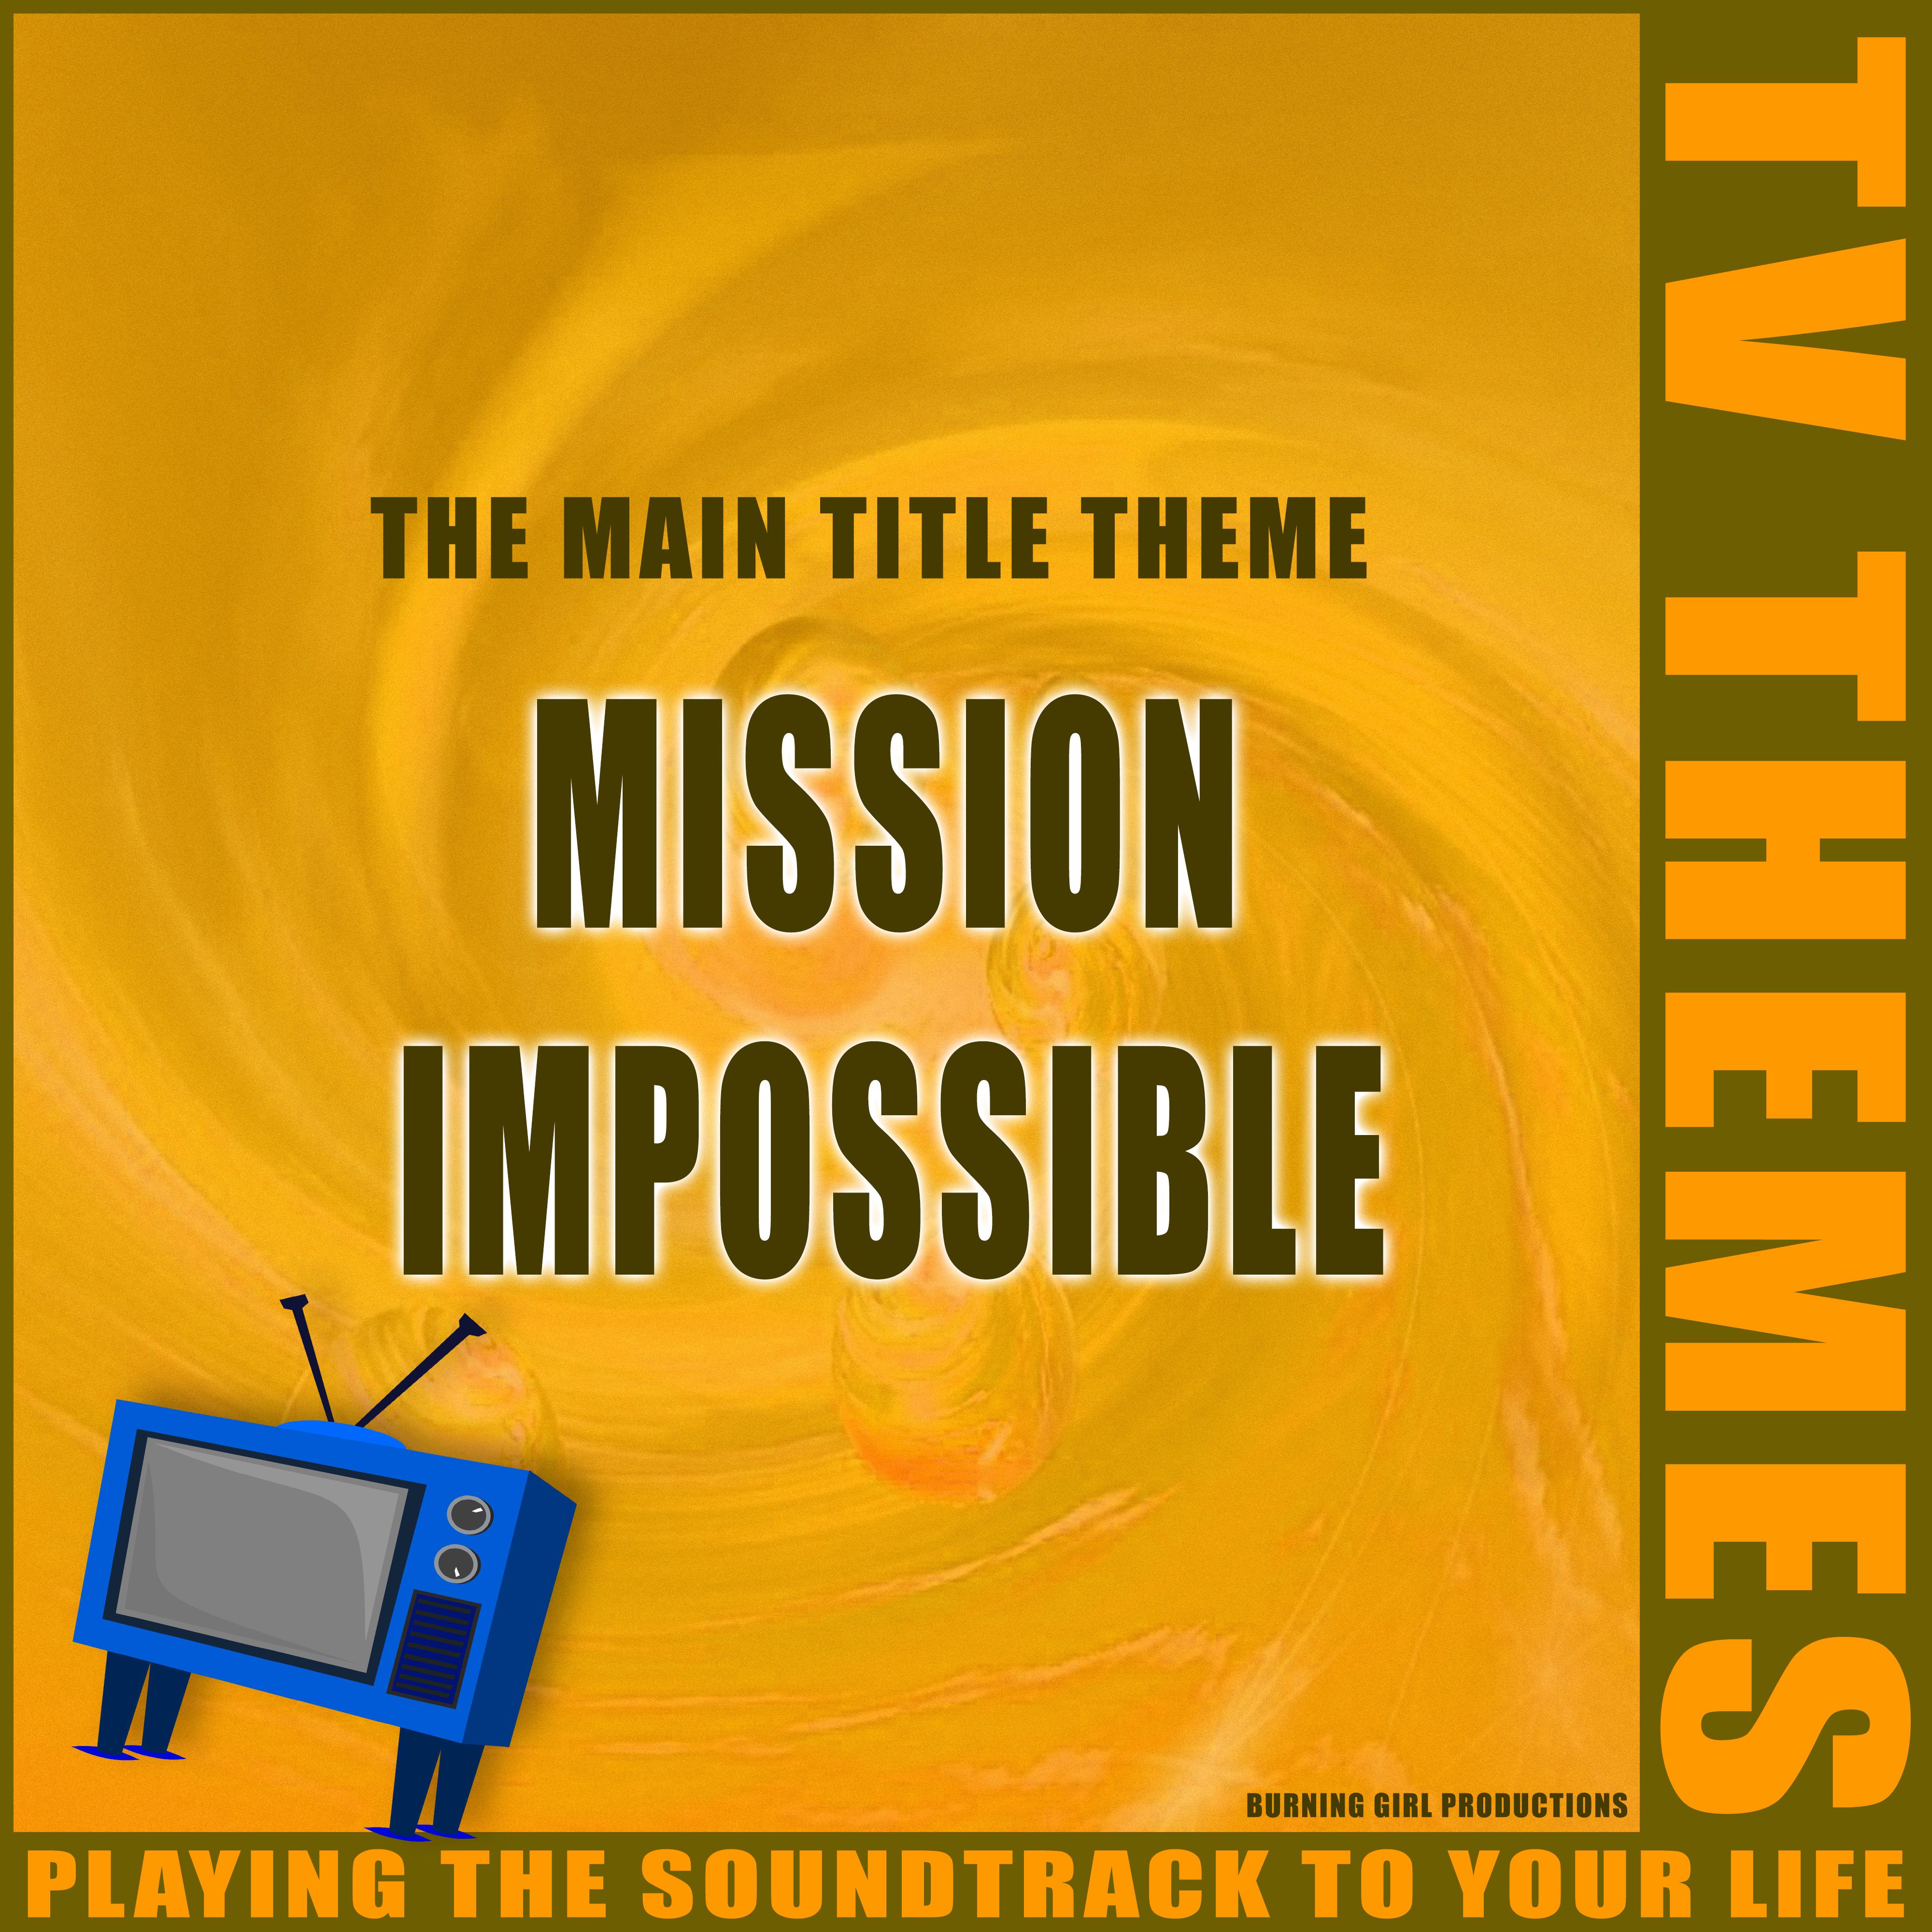 The Main Title Theme - Mission Impossible